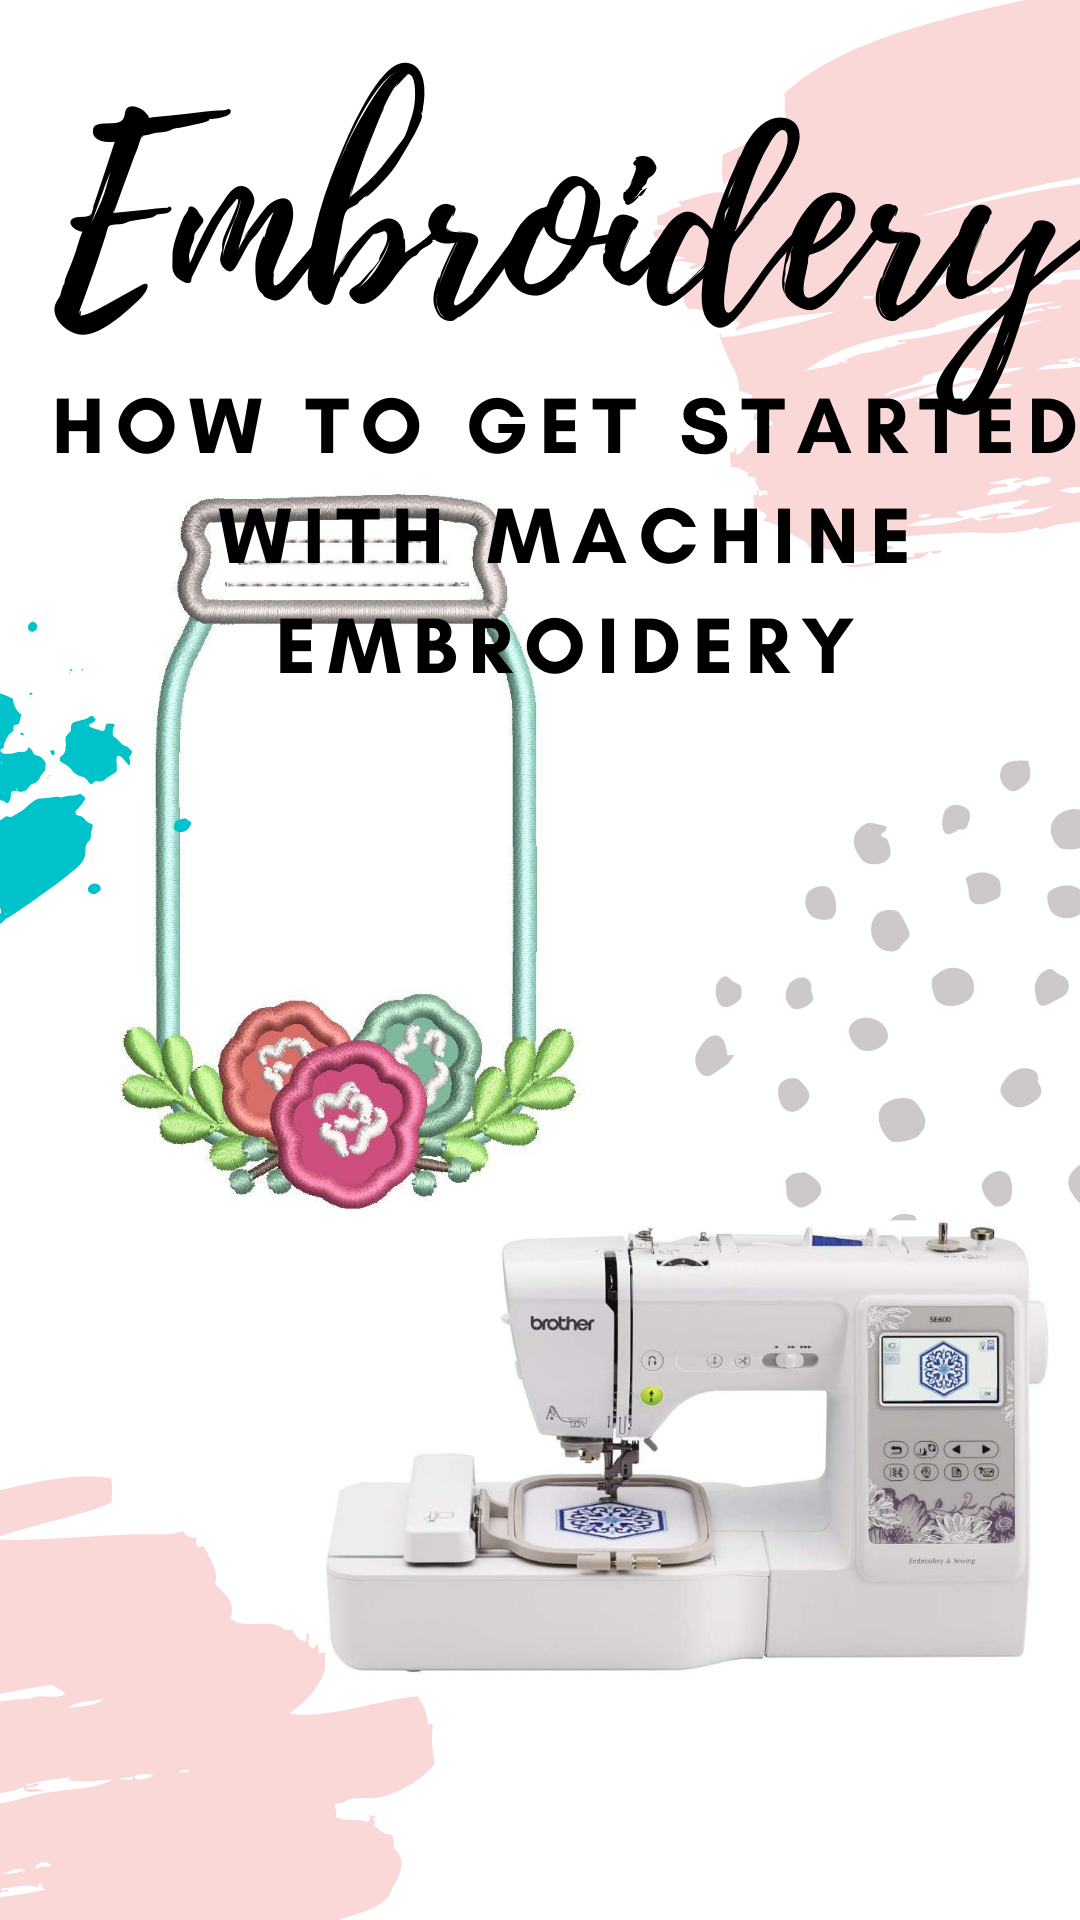 HOW TO GET STARTED WITH MACHINE EMBROIDERY - supplies needed, tips and tricks, starter projects, project inspiration and more. via @brookeberry